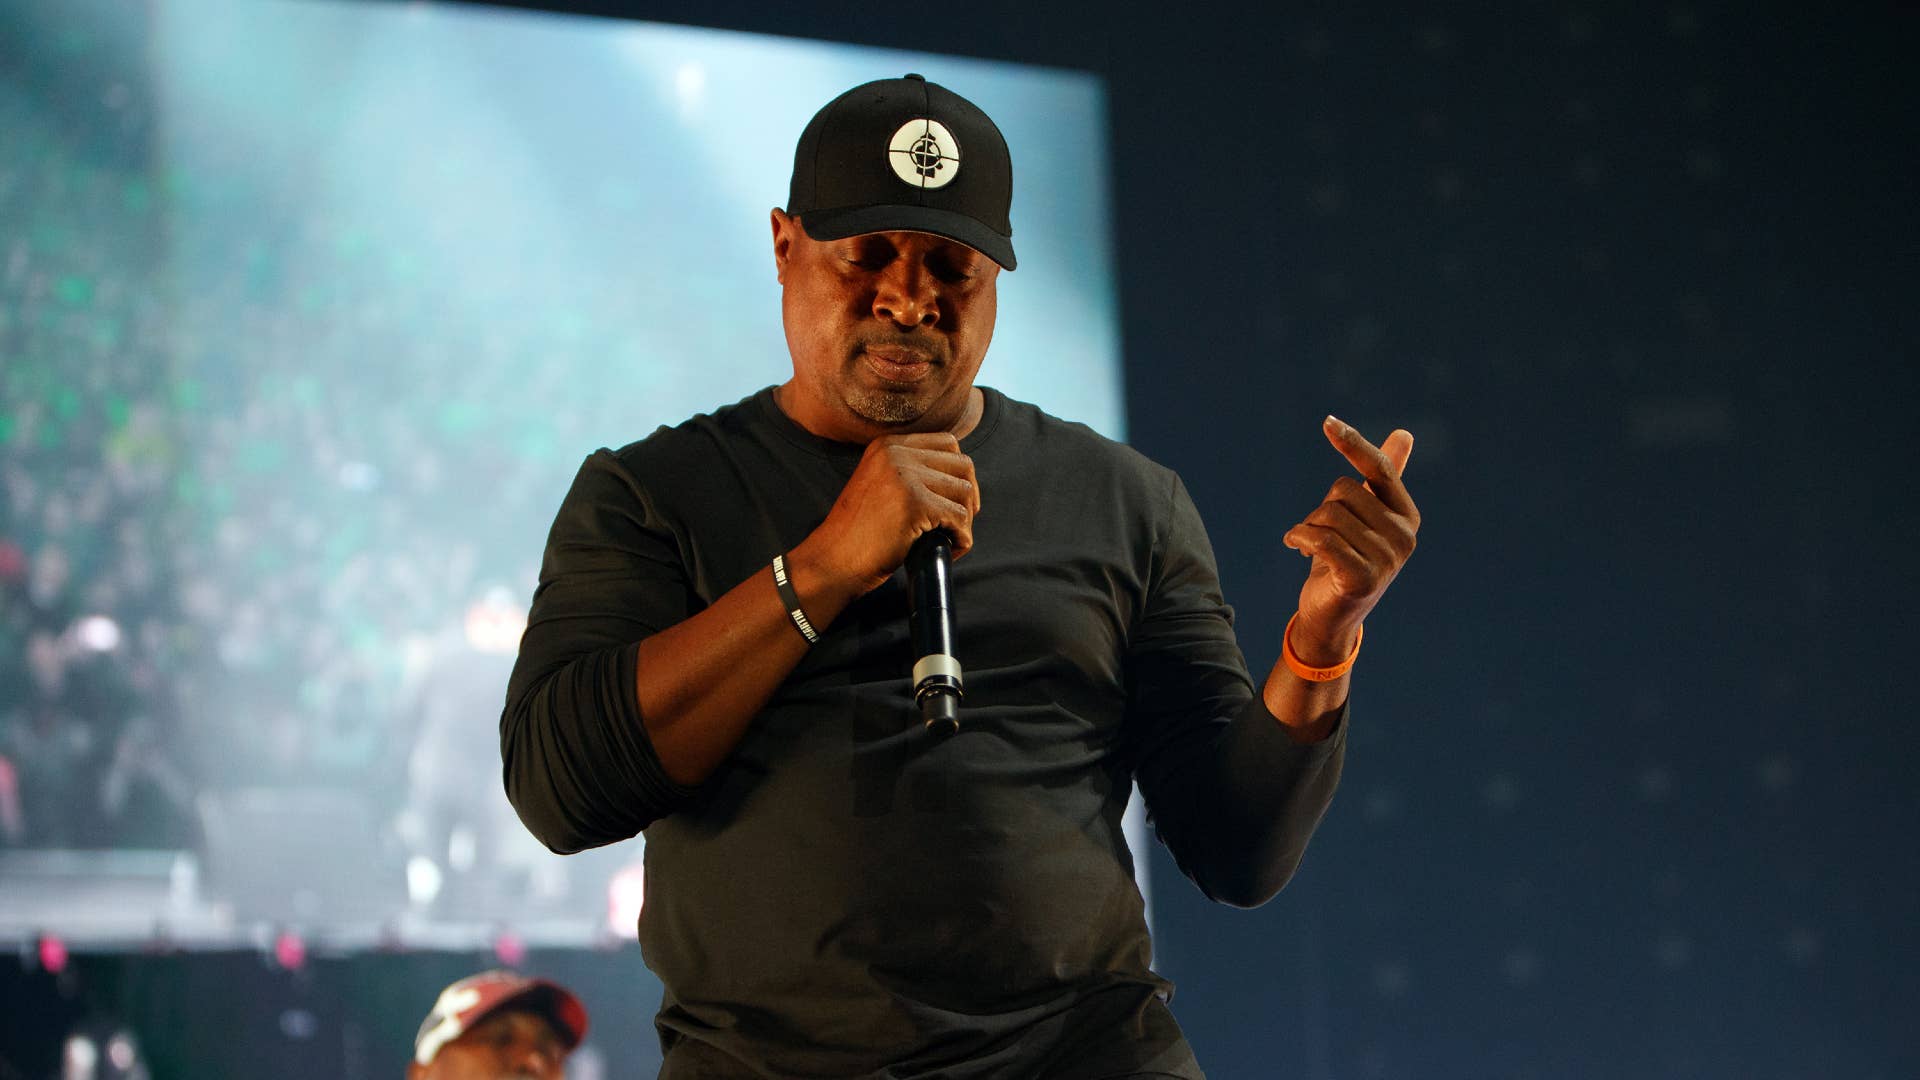 Chuck D performs in front of a crowd.